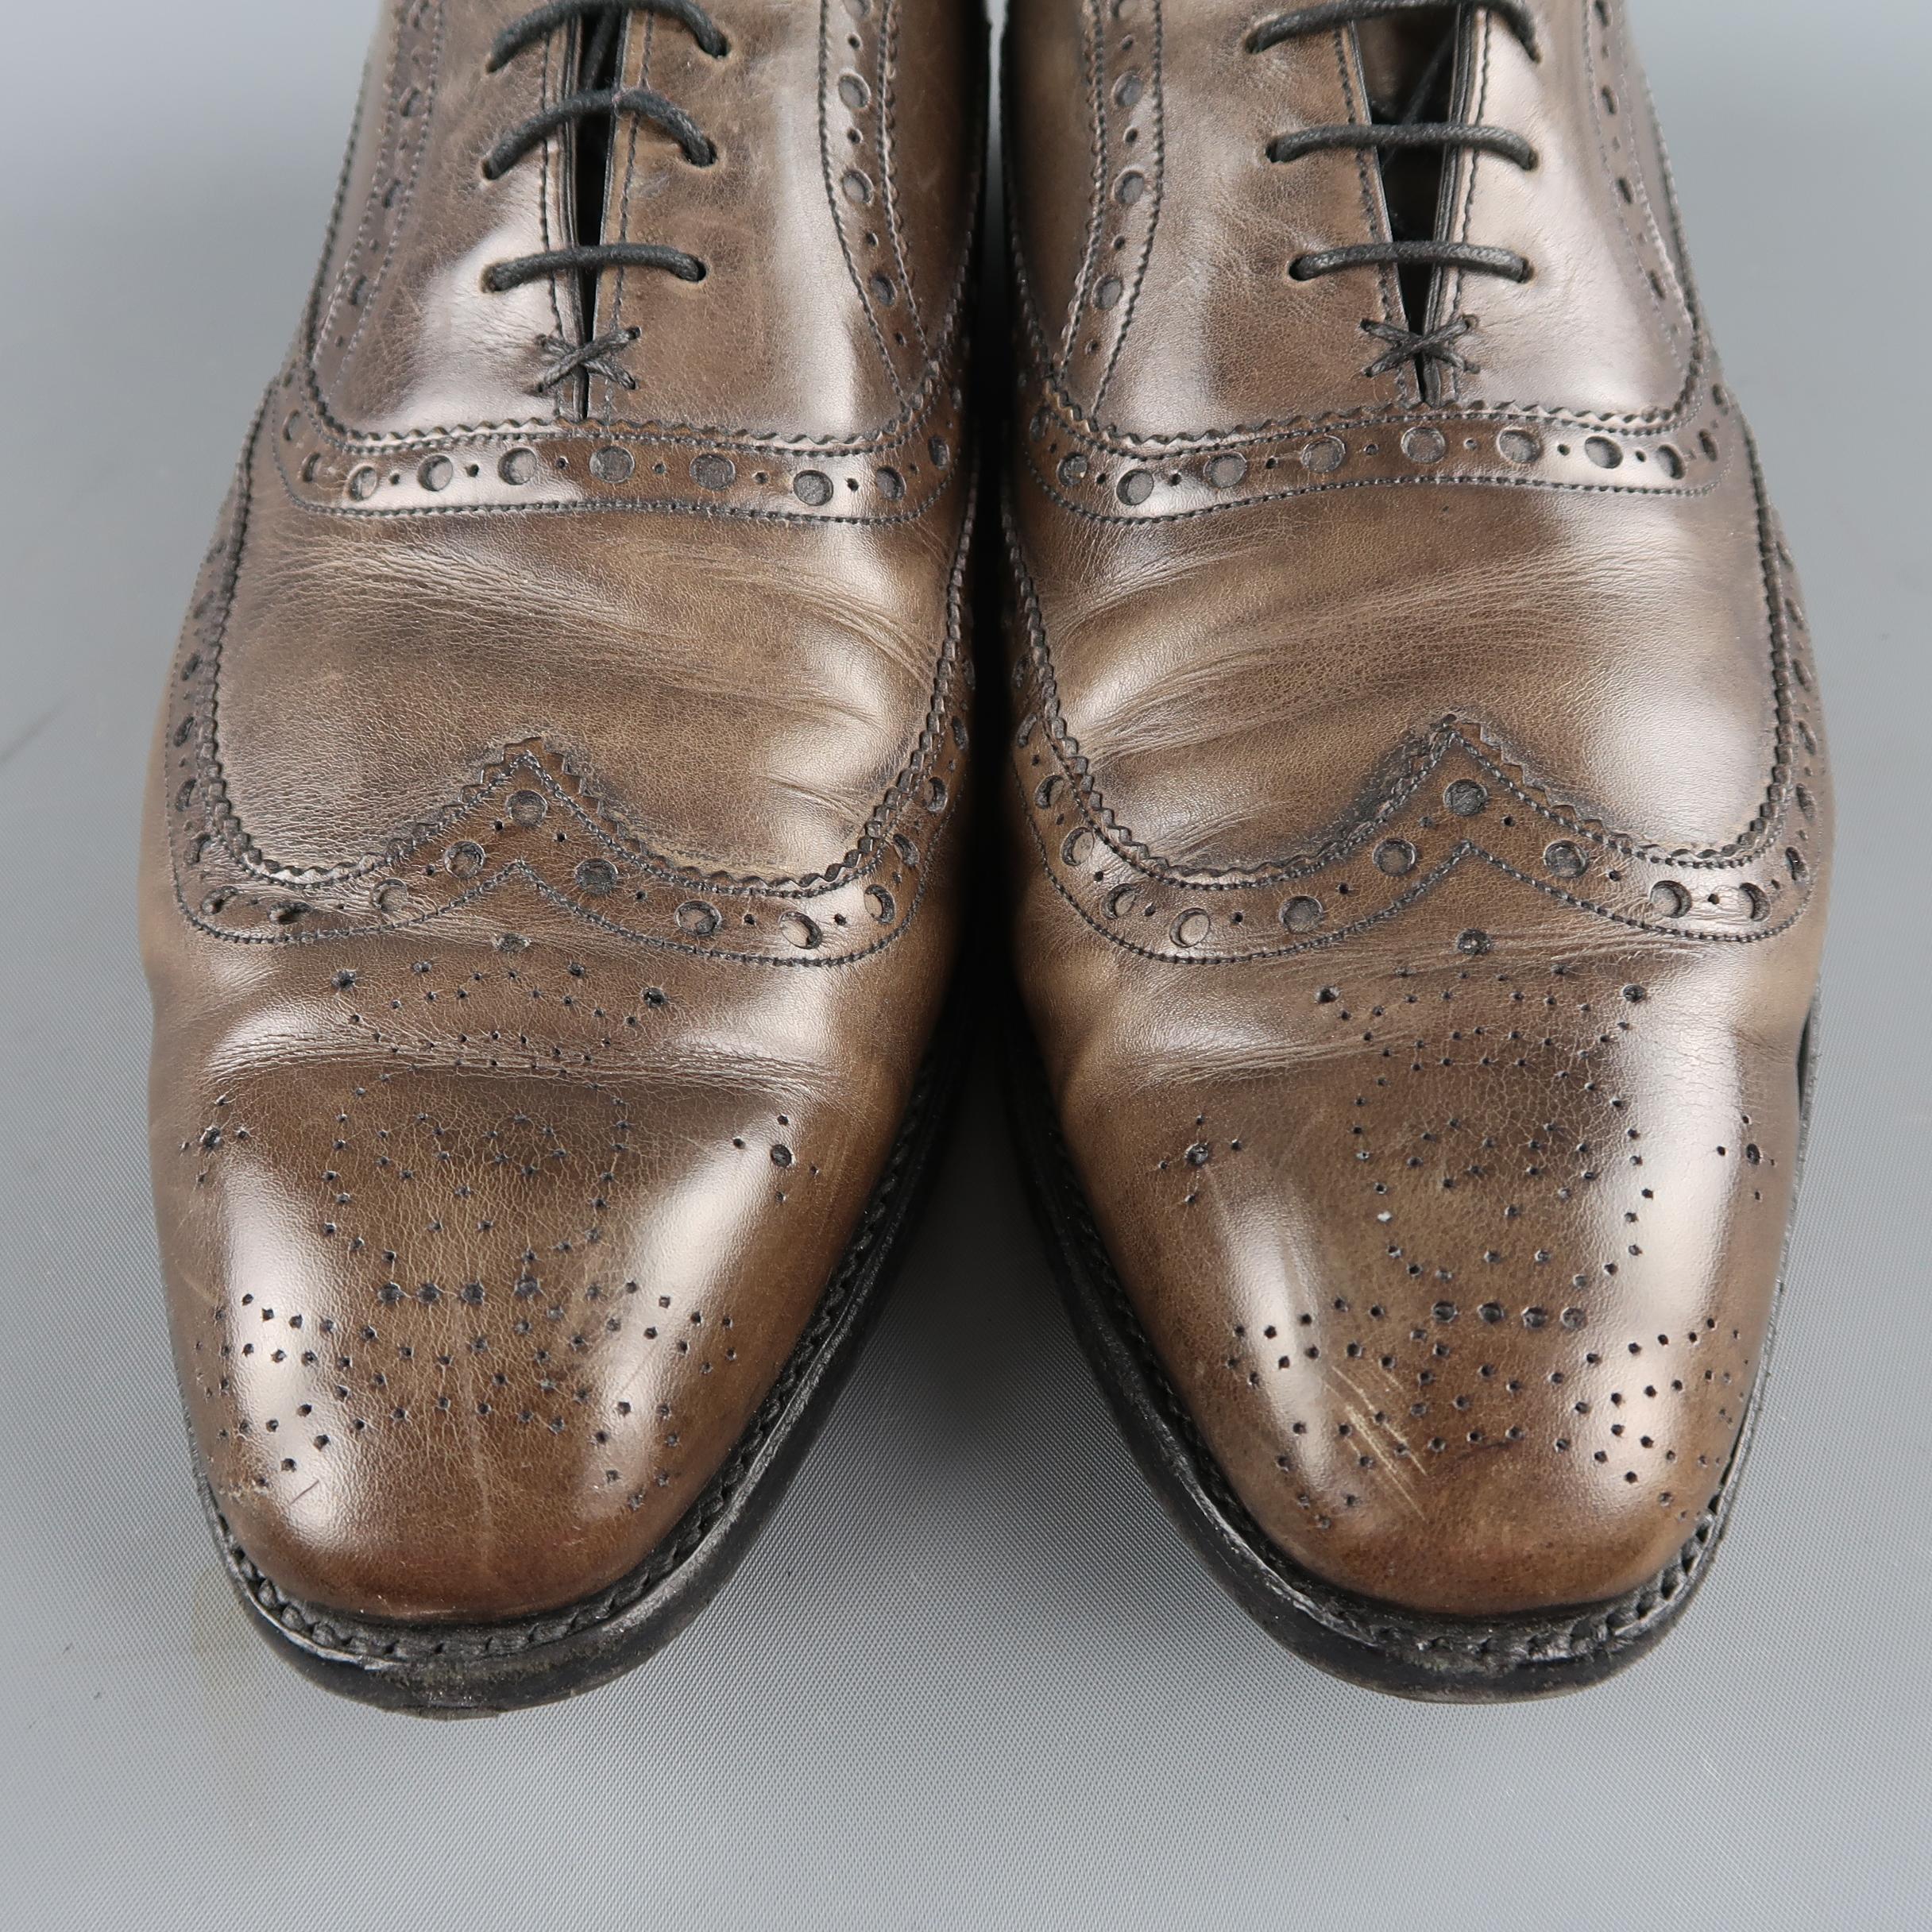 BAKER BLACK ARCHDALE brogues come in taupe gray leather with perforated piping and wing tip with skull crossbones medallion. Made in England.
 
Good Pre-Owned Condition.
Marked: 10
 
Outsole: 12 x 4 in.